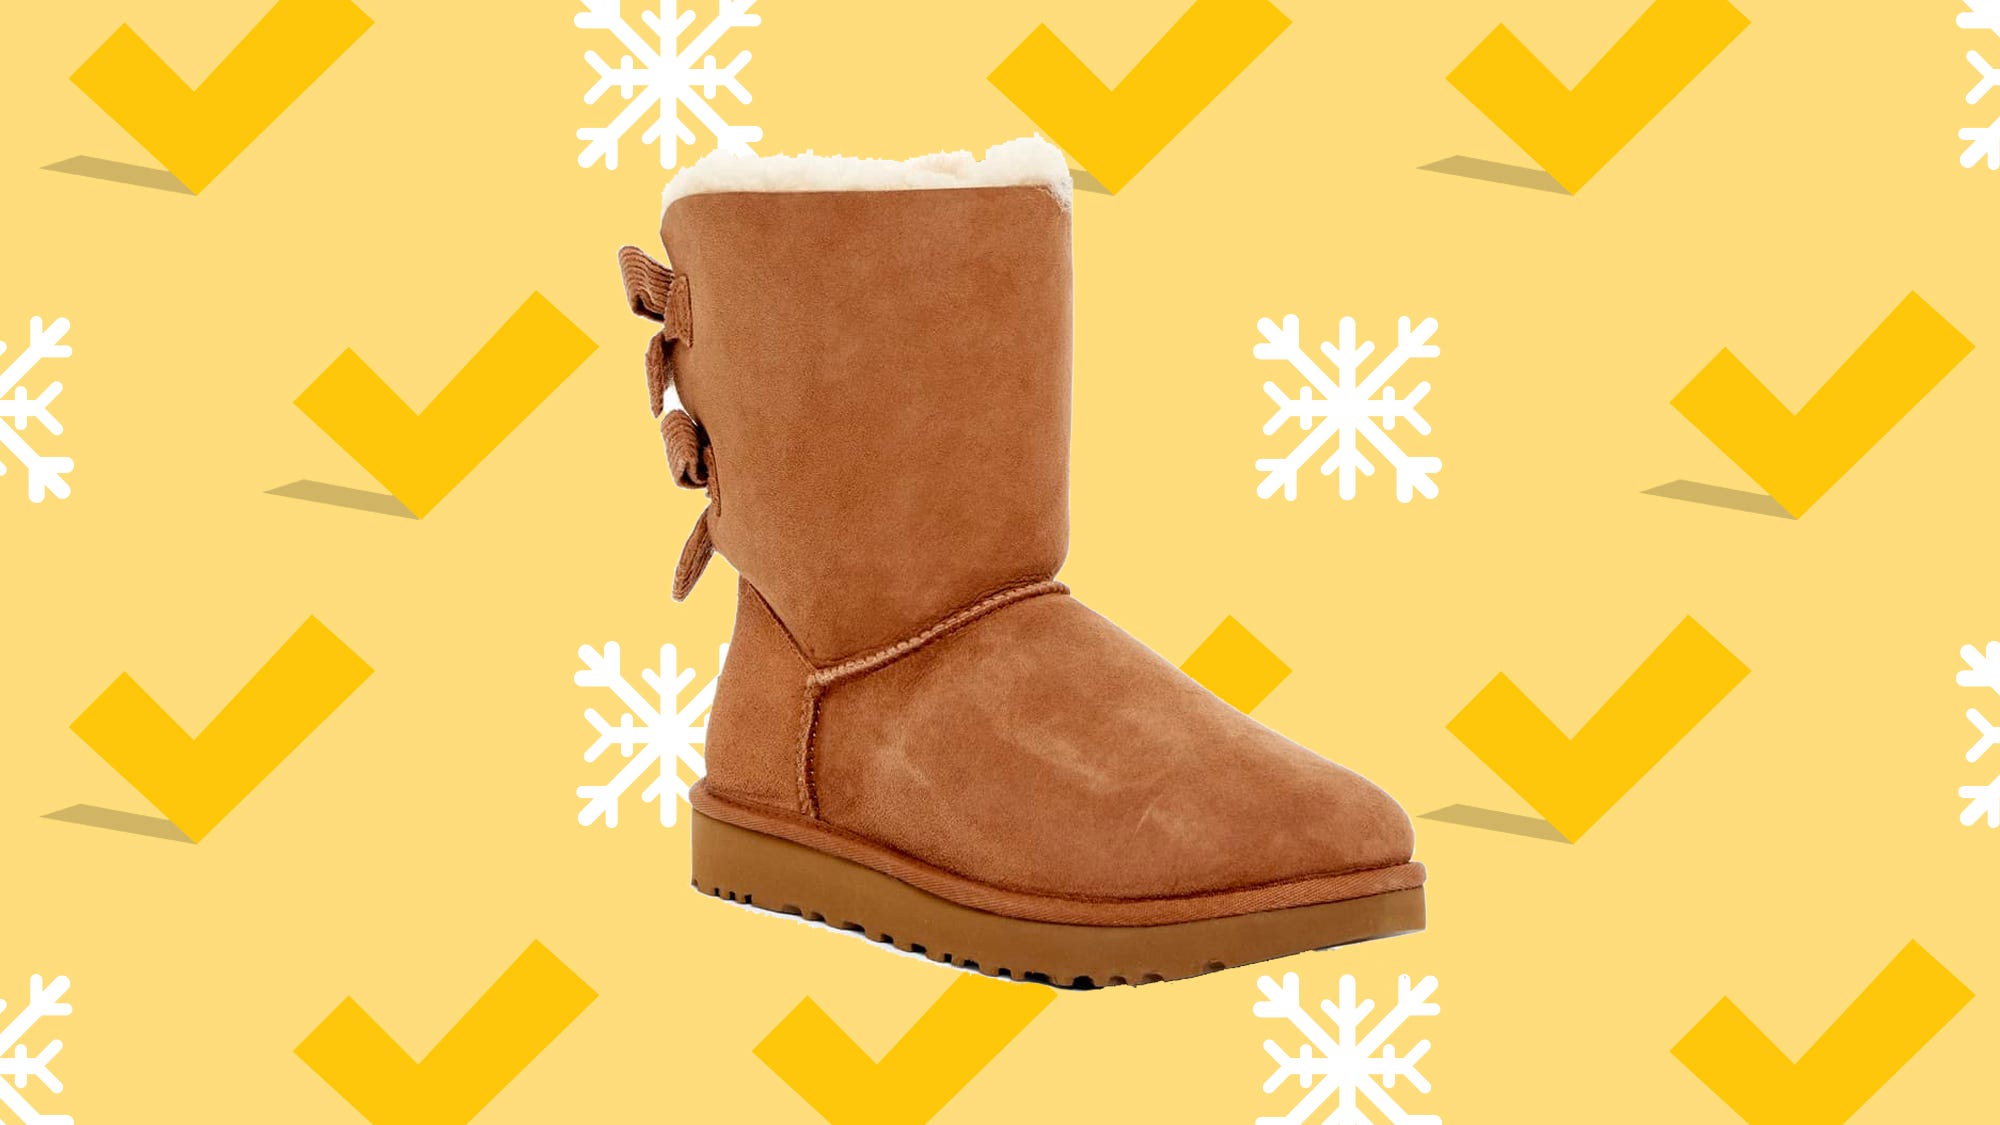 ugg boots on sale